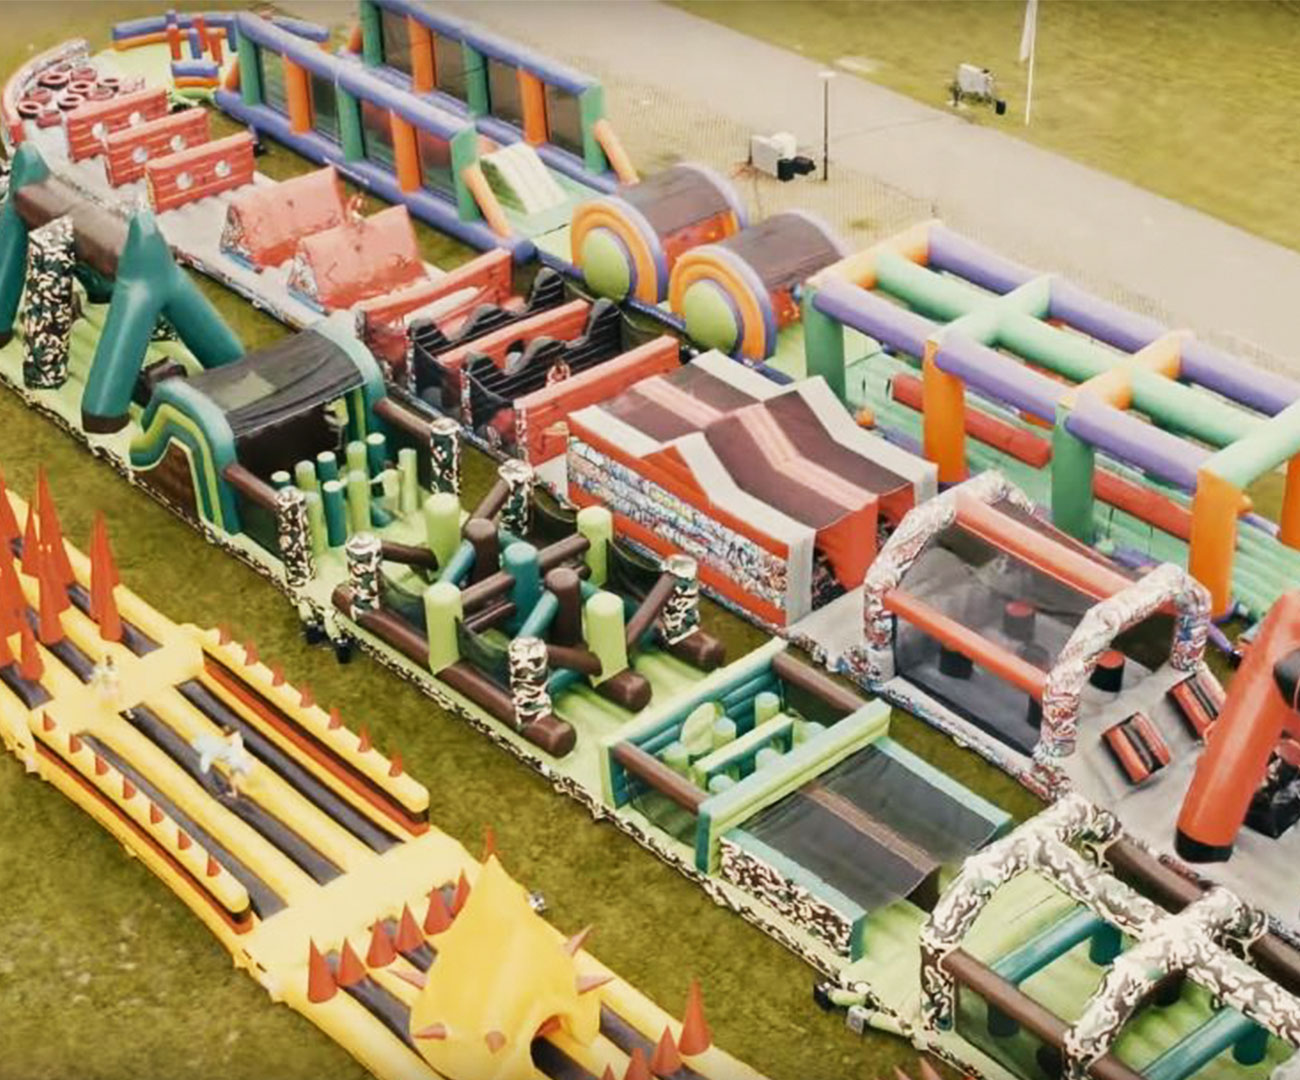 The World's Biggest Inflatable Playground Made For Adults